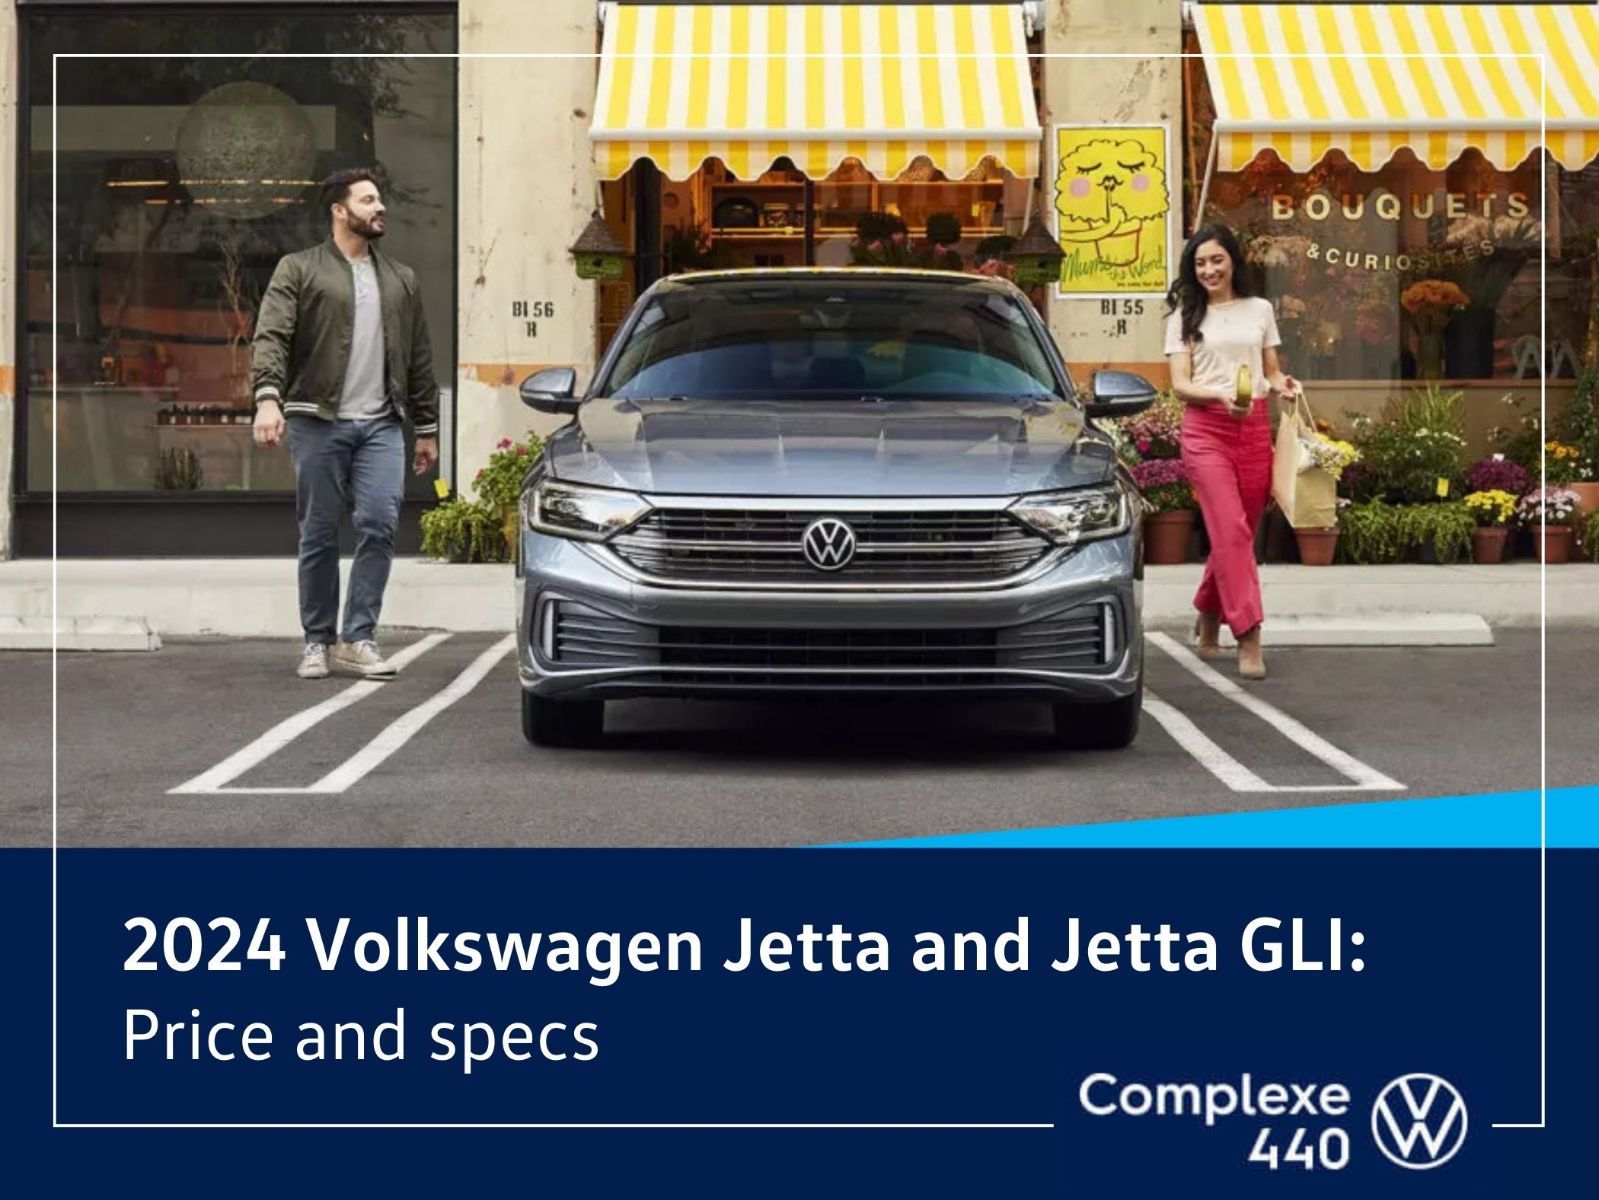 header image - couple about to board a 2024 VW Jetta parked in front of a flower shop